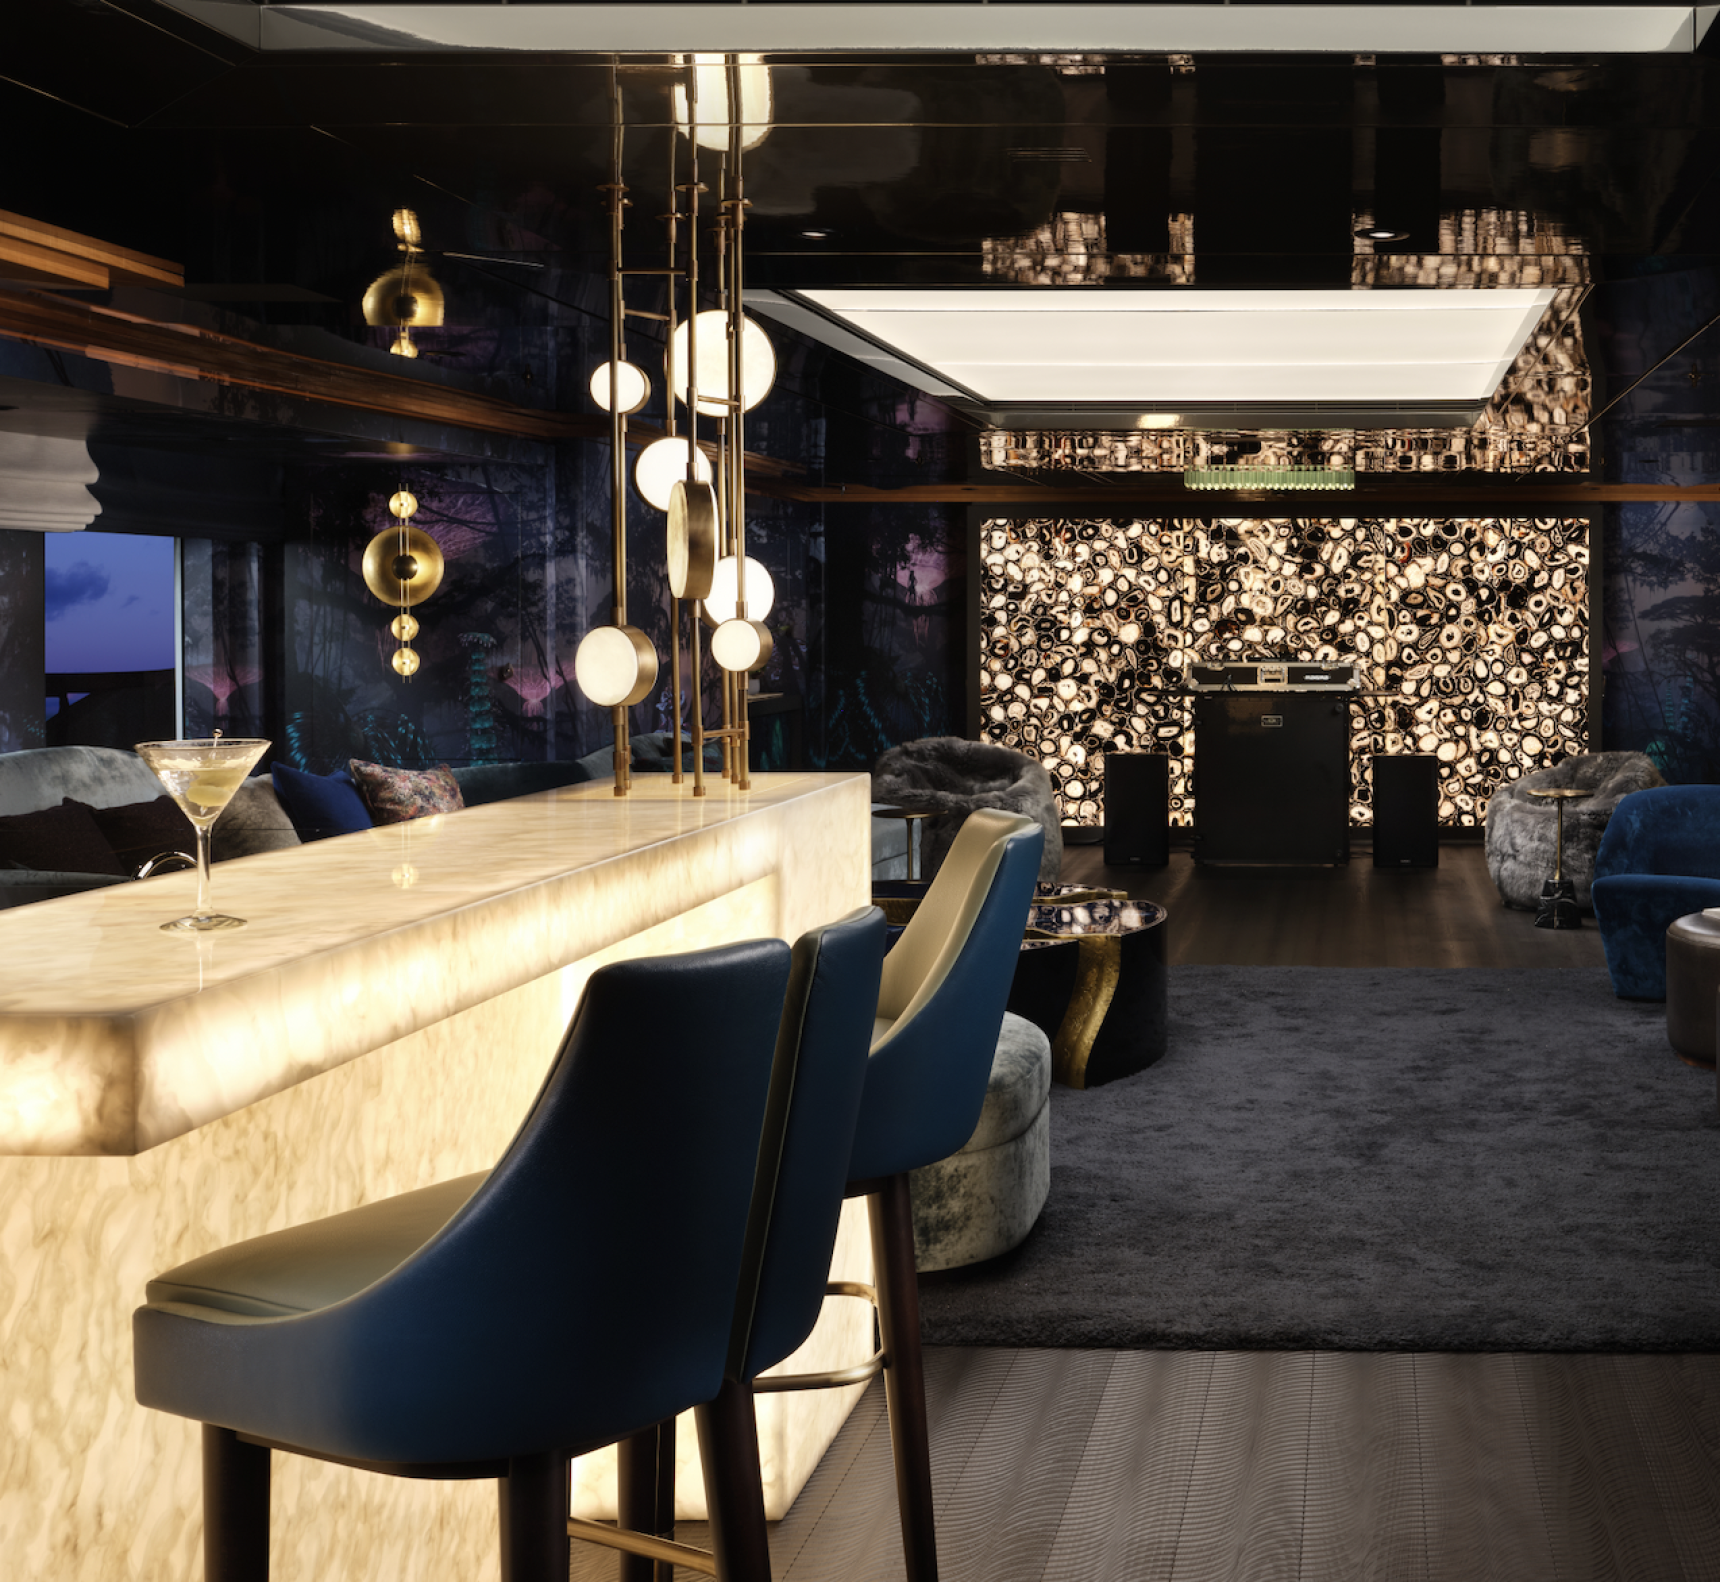 Lounge and Bar Area, Photographs by Jack Hardy©, 2022